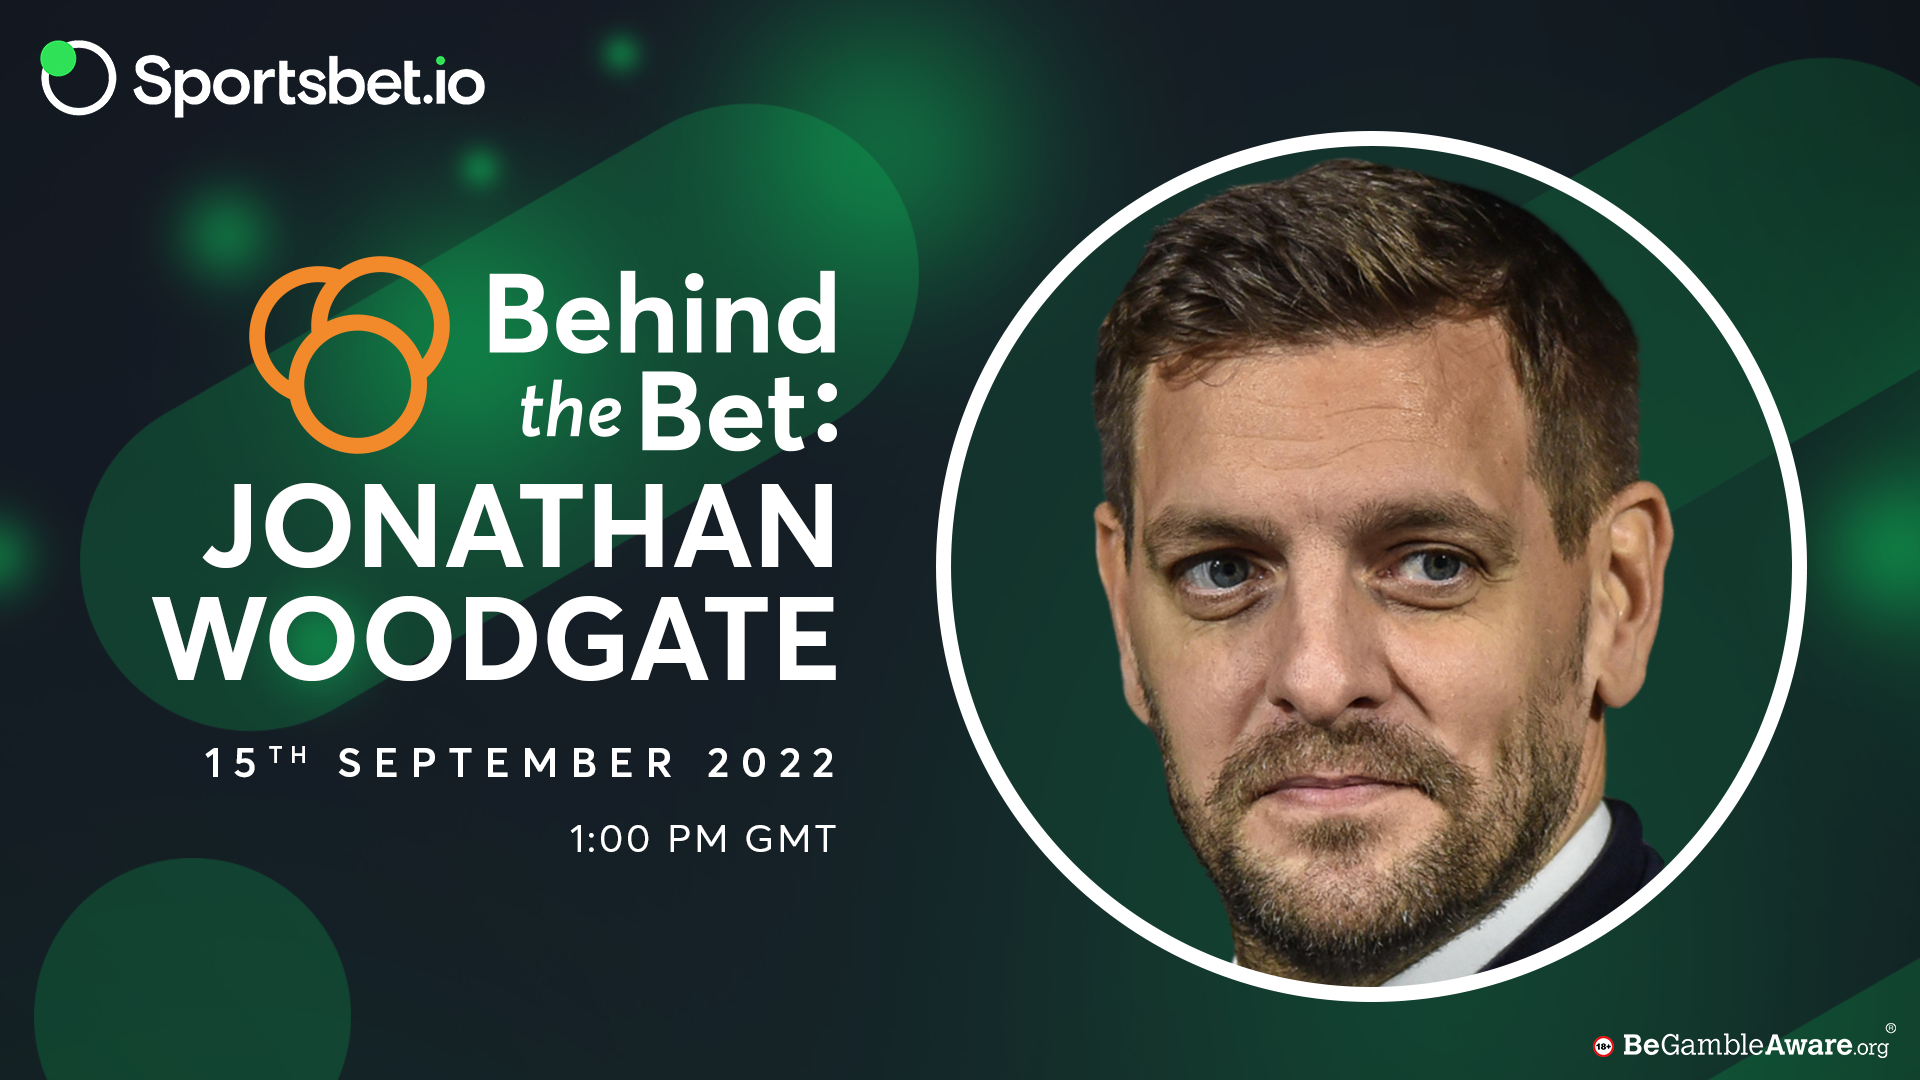 Jonathan Woodgate soccer - Behind the Bet